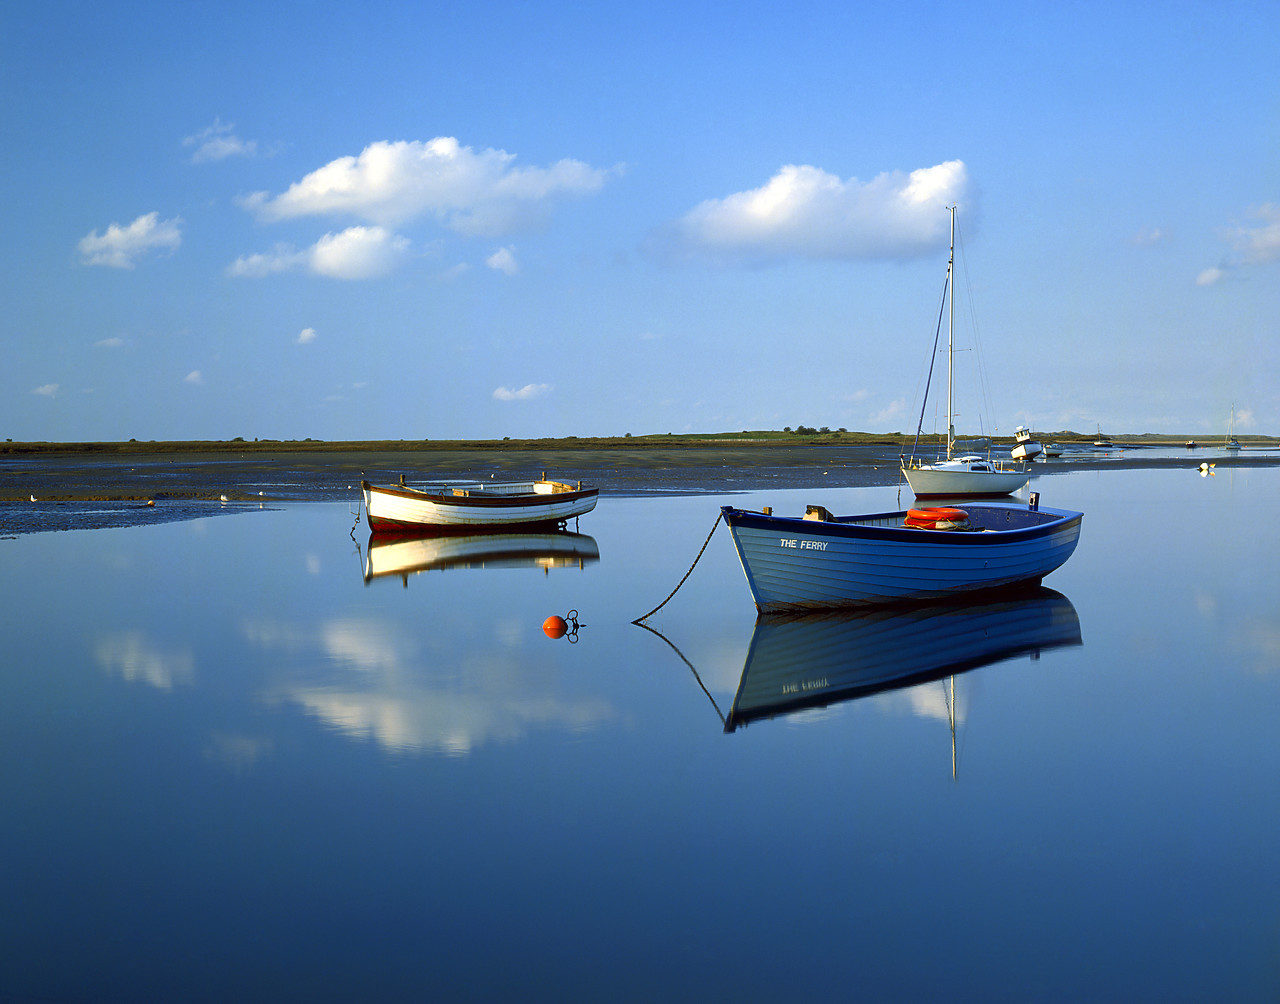 #902727 - Boat Reflections, Brancaster Staithe, Norfolk, England